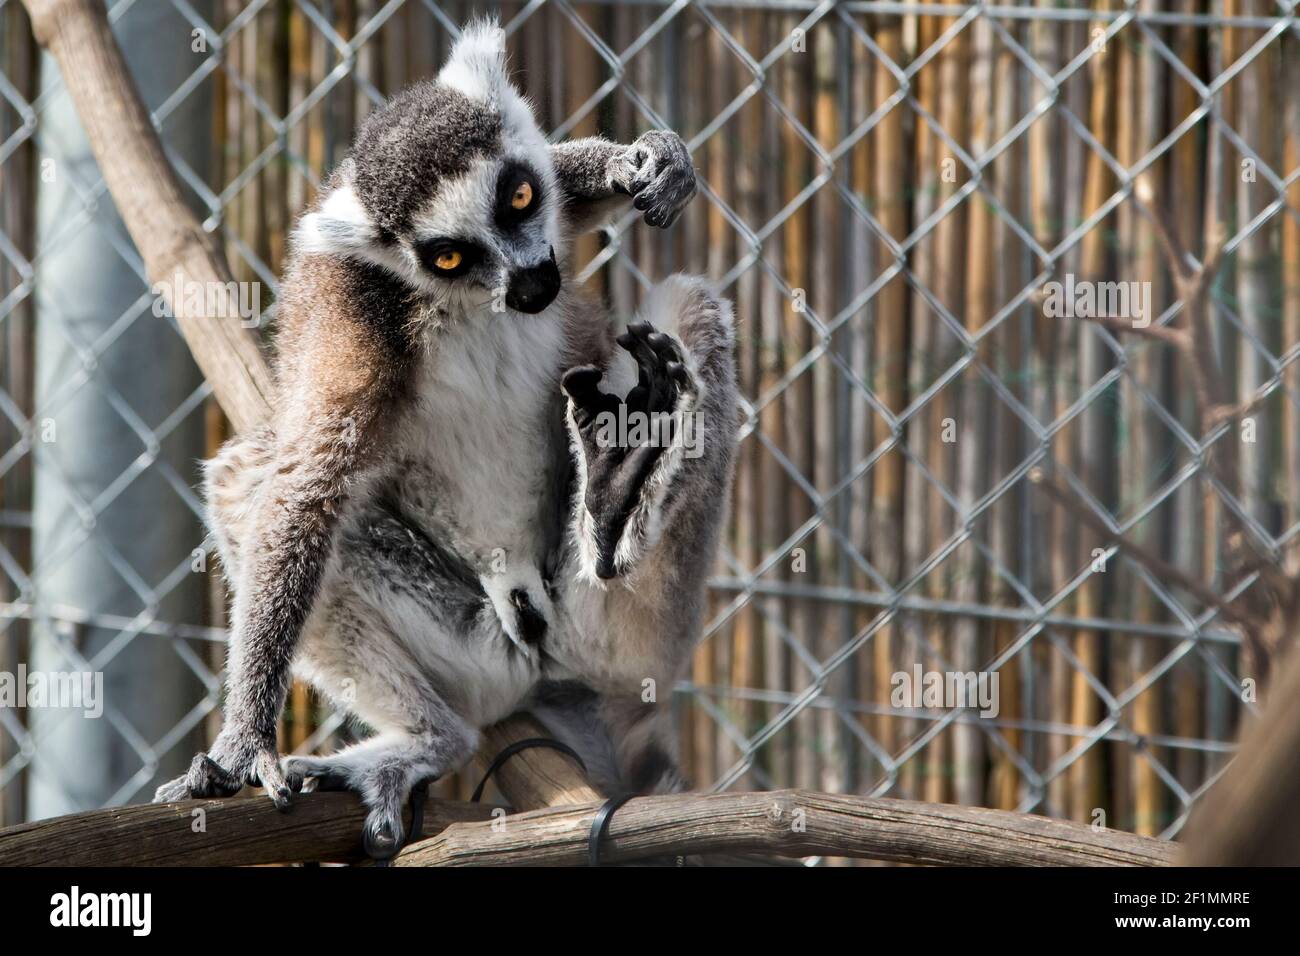 Lemur in a small Animal Zoo Stock Photo